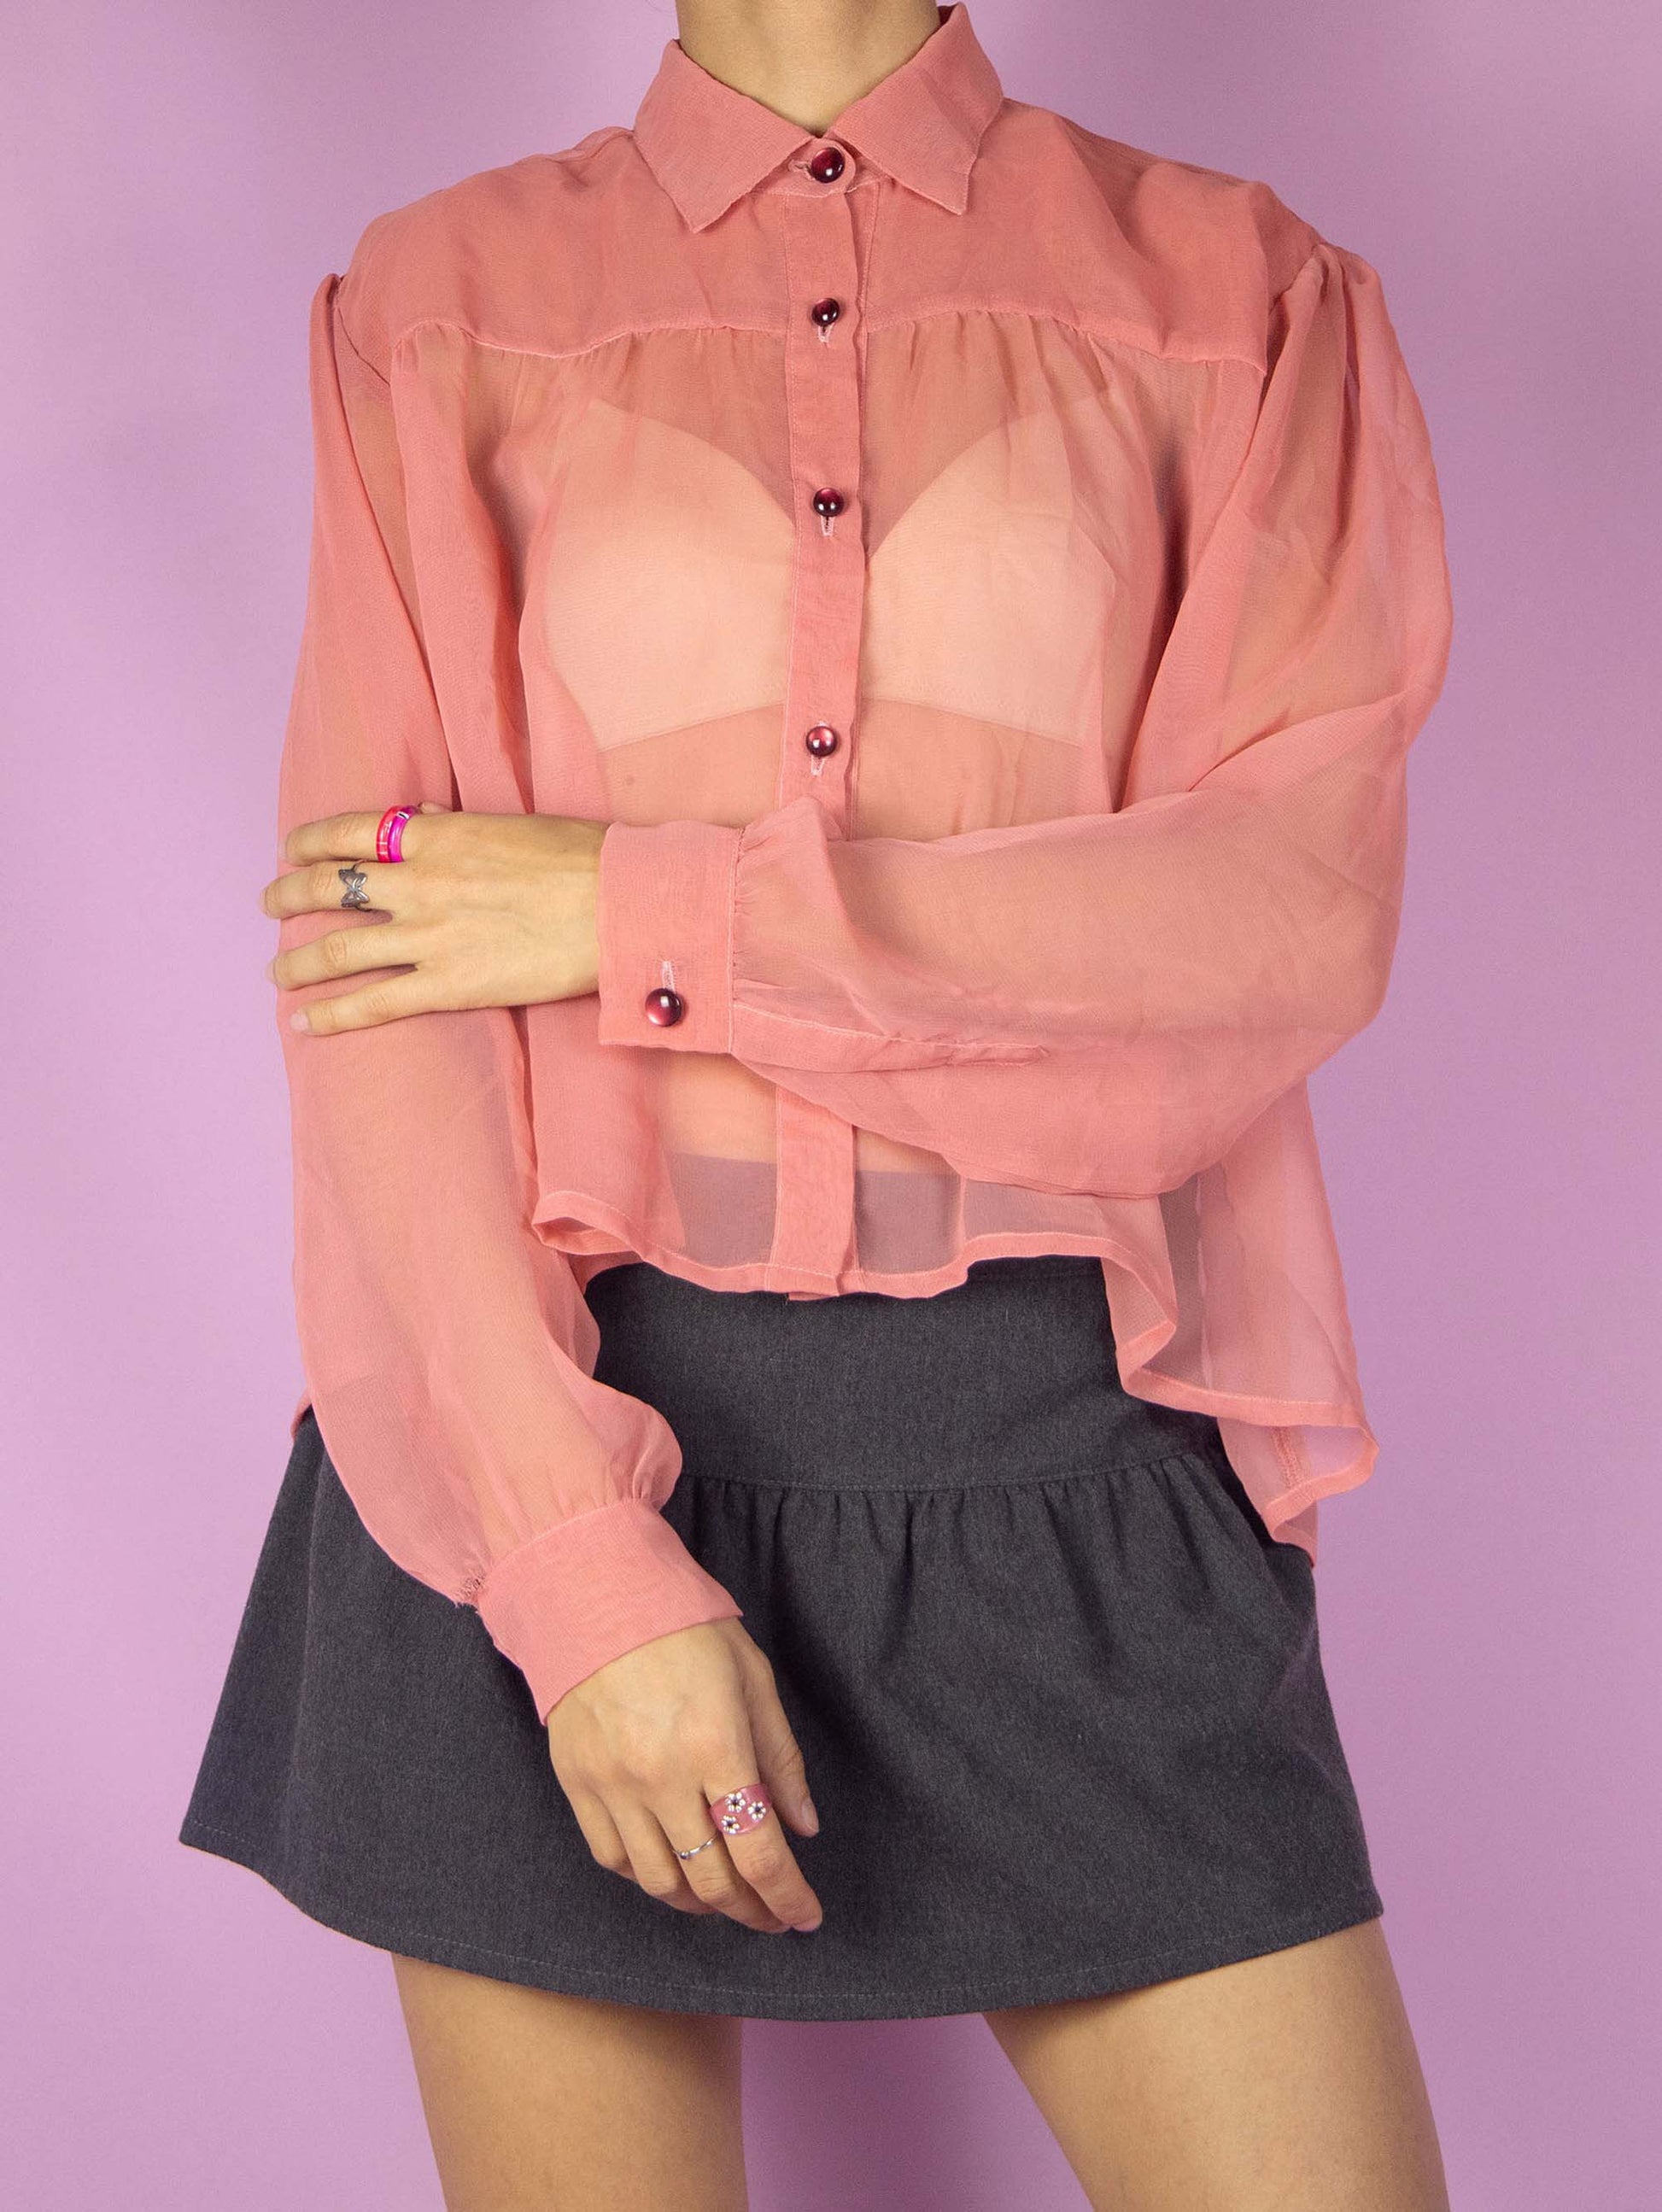 The Y2K Pink Sheer Blouse is a vintage 2000s semi-transparent romantic shirt with a collar and buttons.